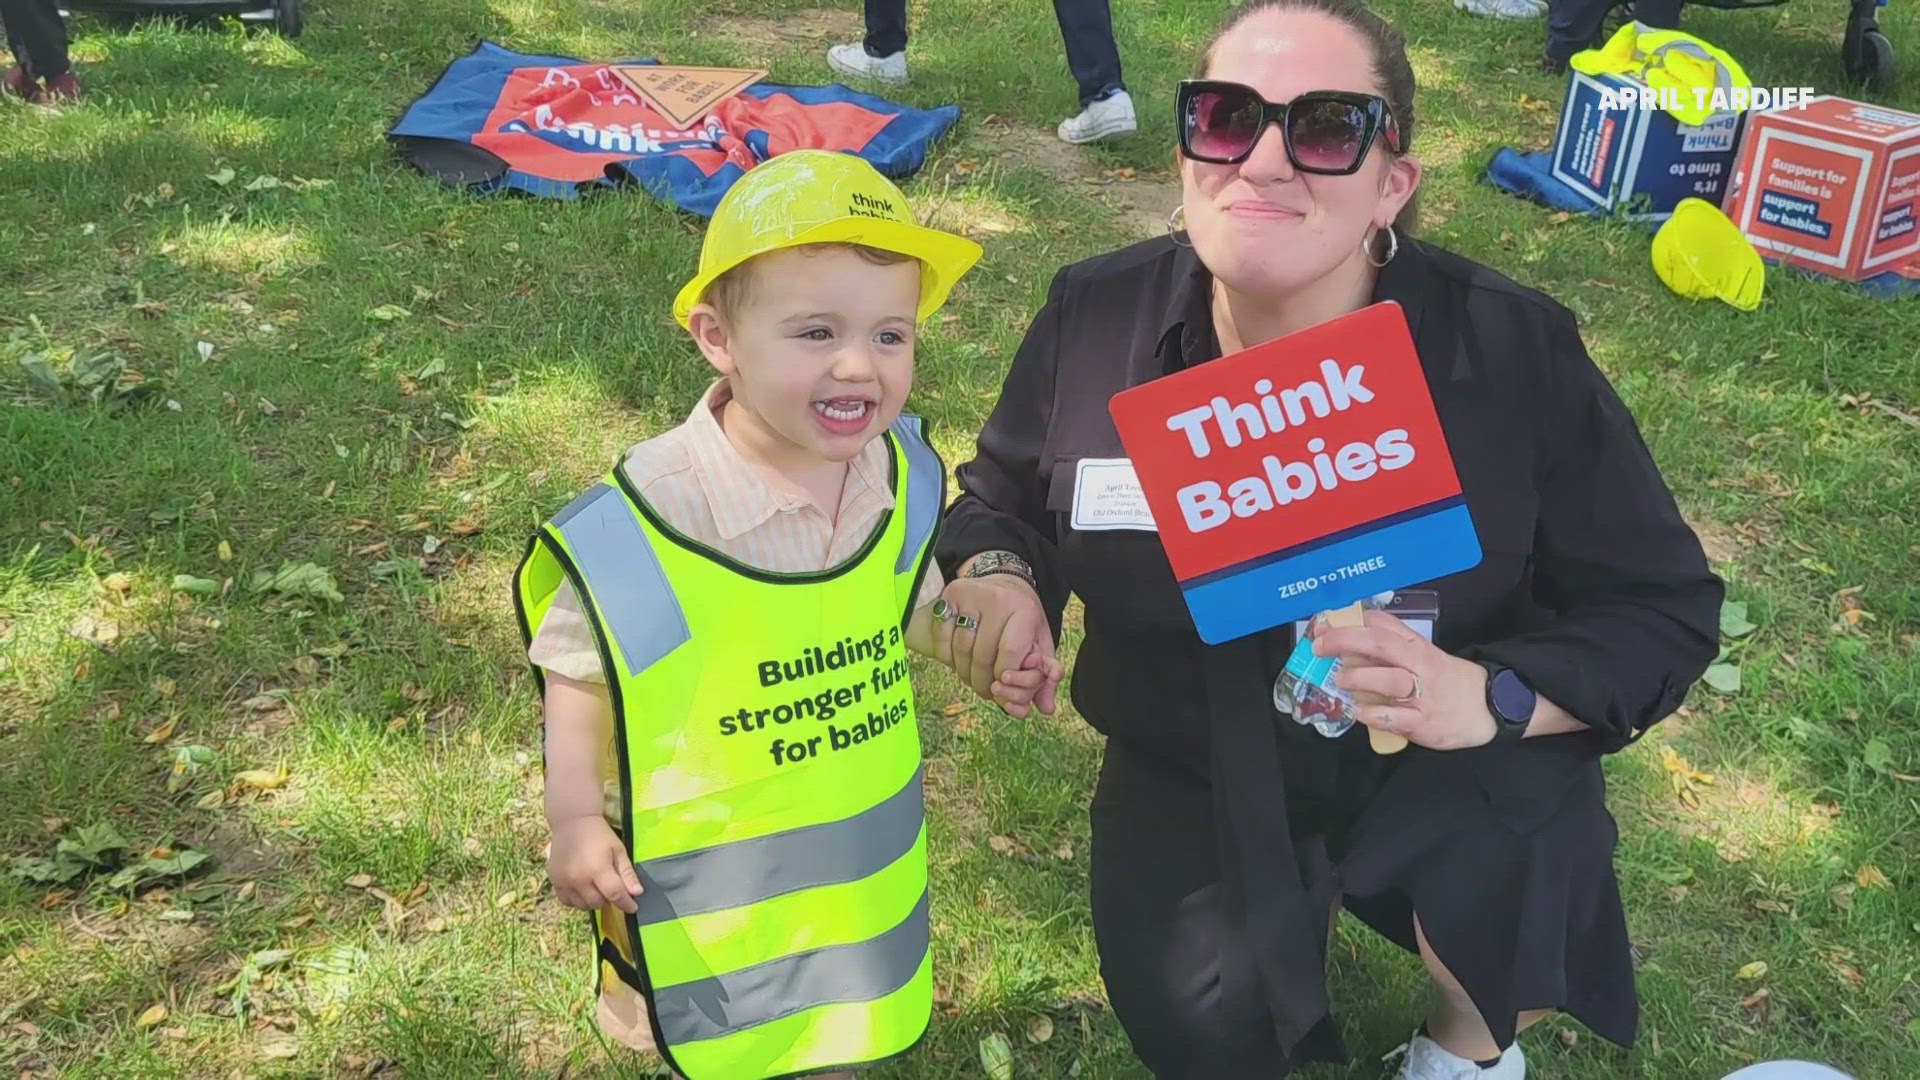 Child care is a huge cost for families, and for some it's completely out of reach. That's part of the message Strolling Thunder aims to share with lawmakers.